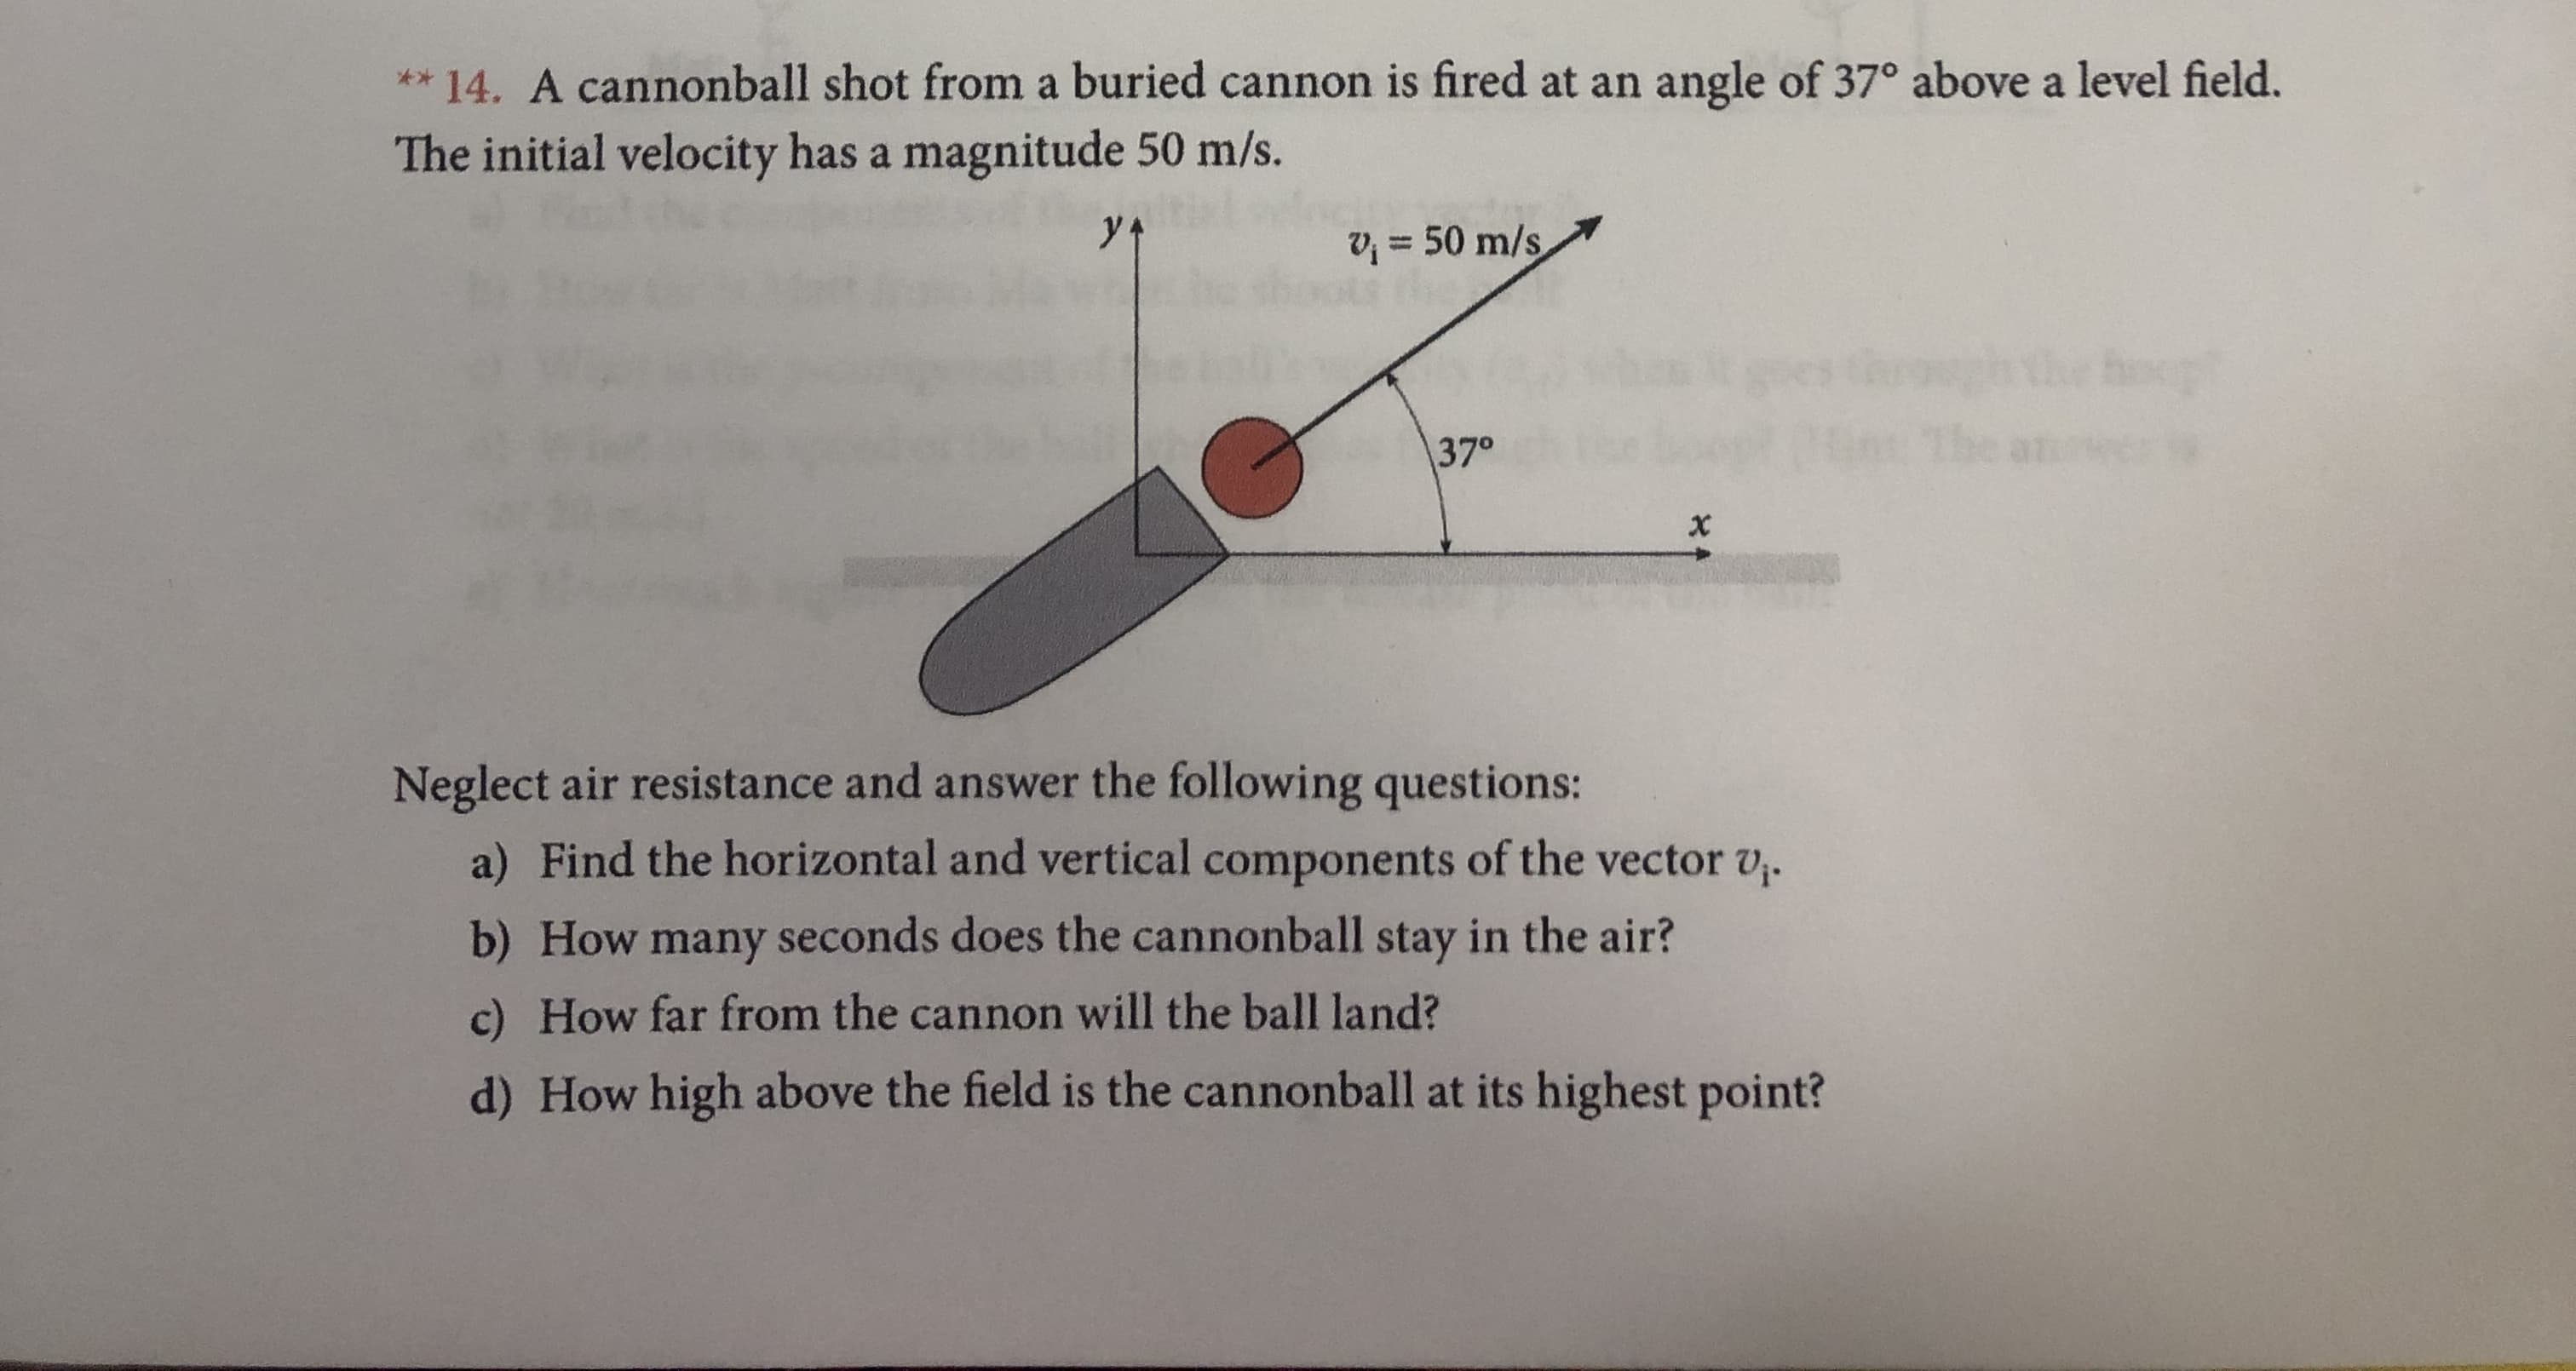 ** 14. A cannonball shot from a buried cannon is fired at an
angle of 37° above a level field.
The initial velocity has a magnitude 50 m/s.
50 m/s
the oop
5an:
370
x
Neglect air resistance and answer the following questions:
a) Find the horizontal and vertical components of the vector v.
b) How many seconds does the cannonball stay in the air?
c) How far from the cannon will the ball land?
d) How high above the field is the cannonball at its highest point?
